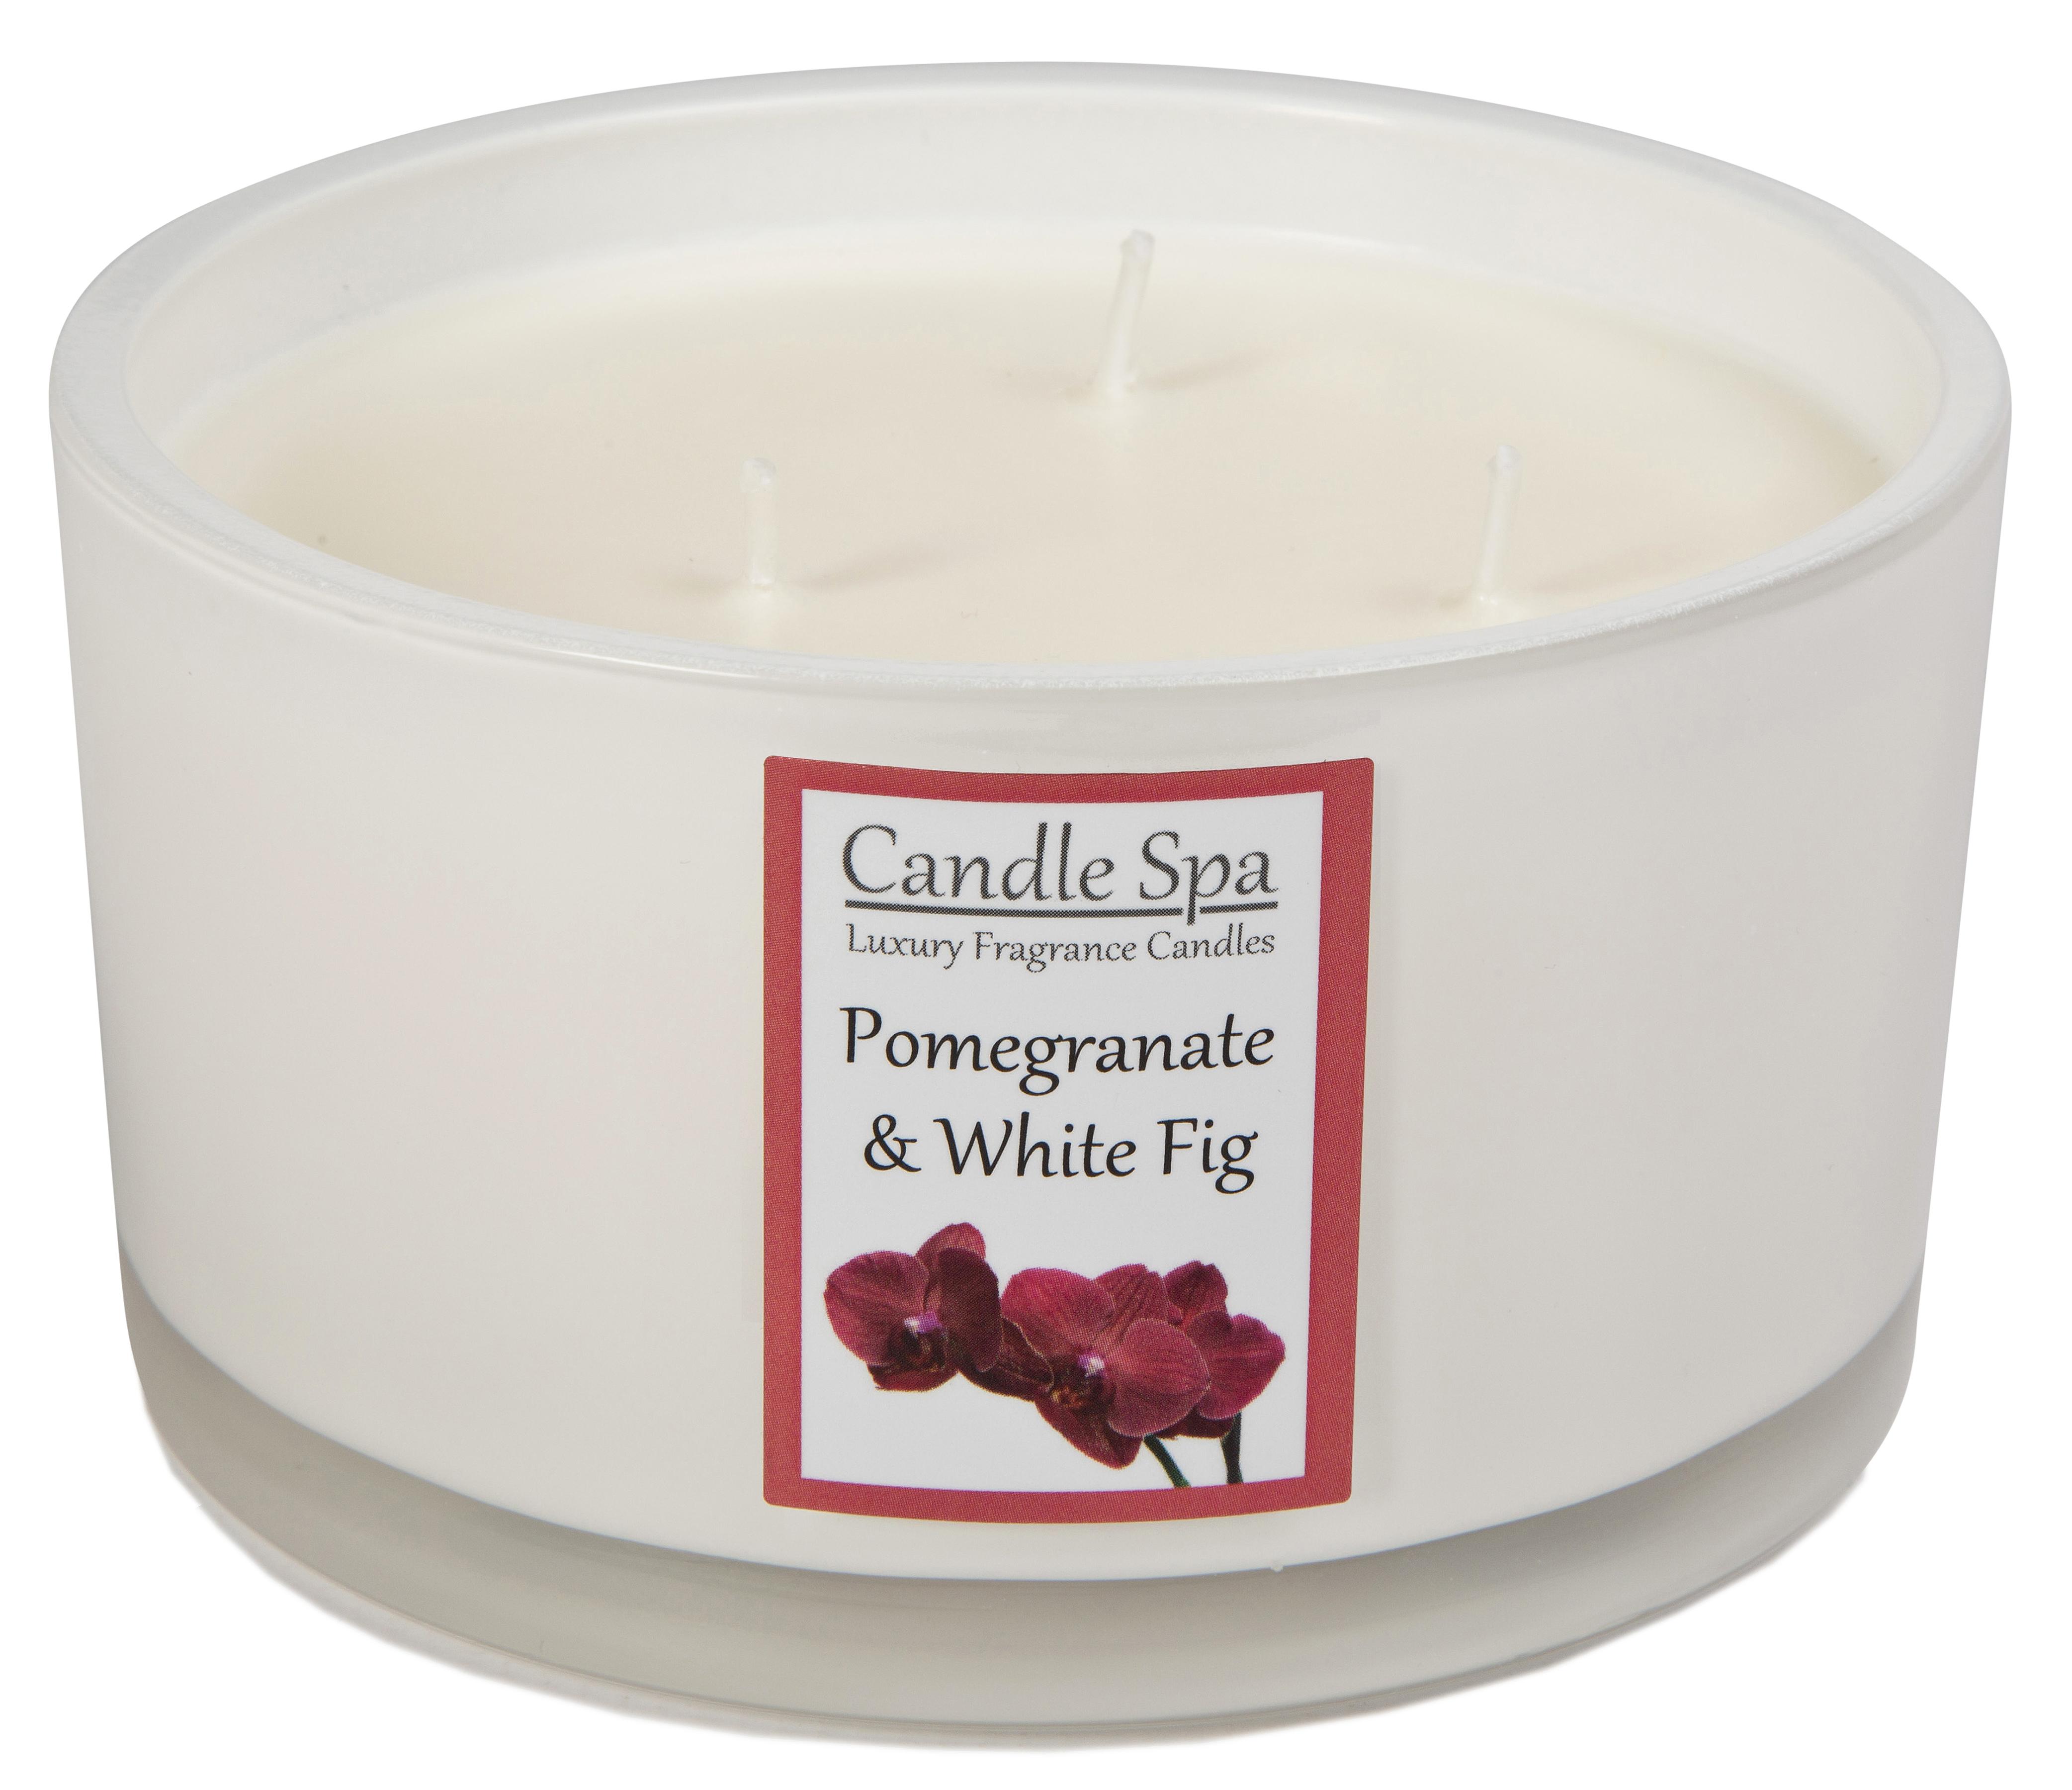 Candle Spa Luxury 3-Wick Candle - Pomegranate & White Fig